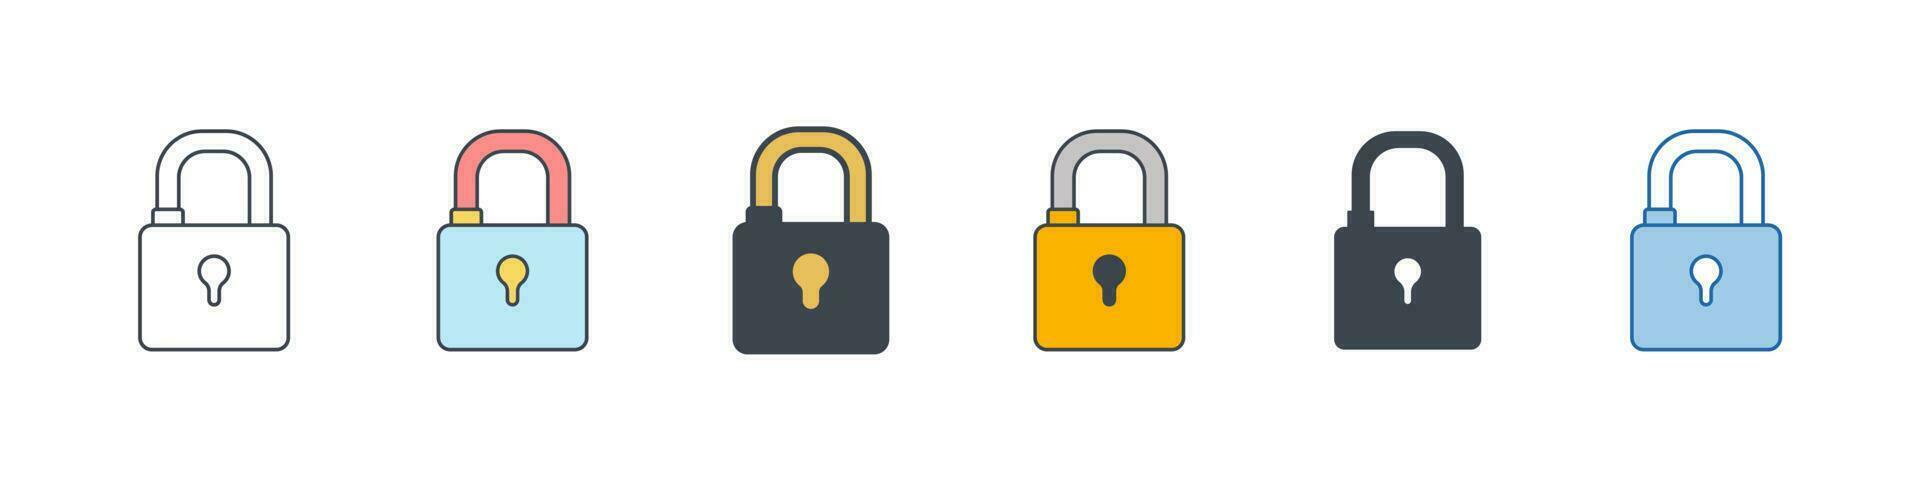 Padlock icon symbol template for graphic and web design collection logo vector illustration